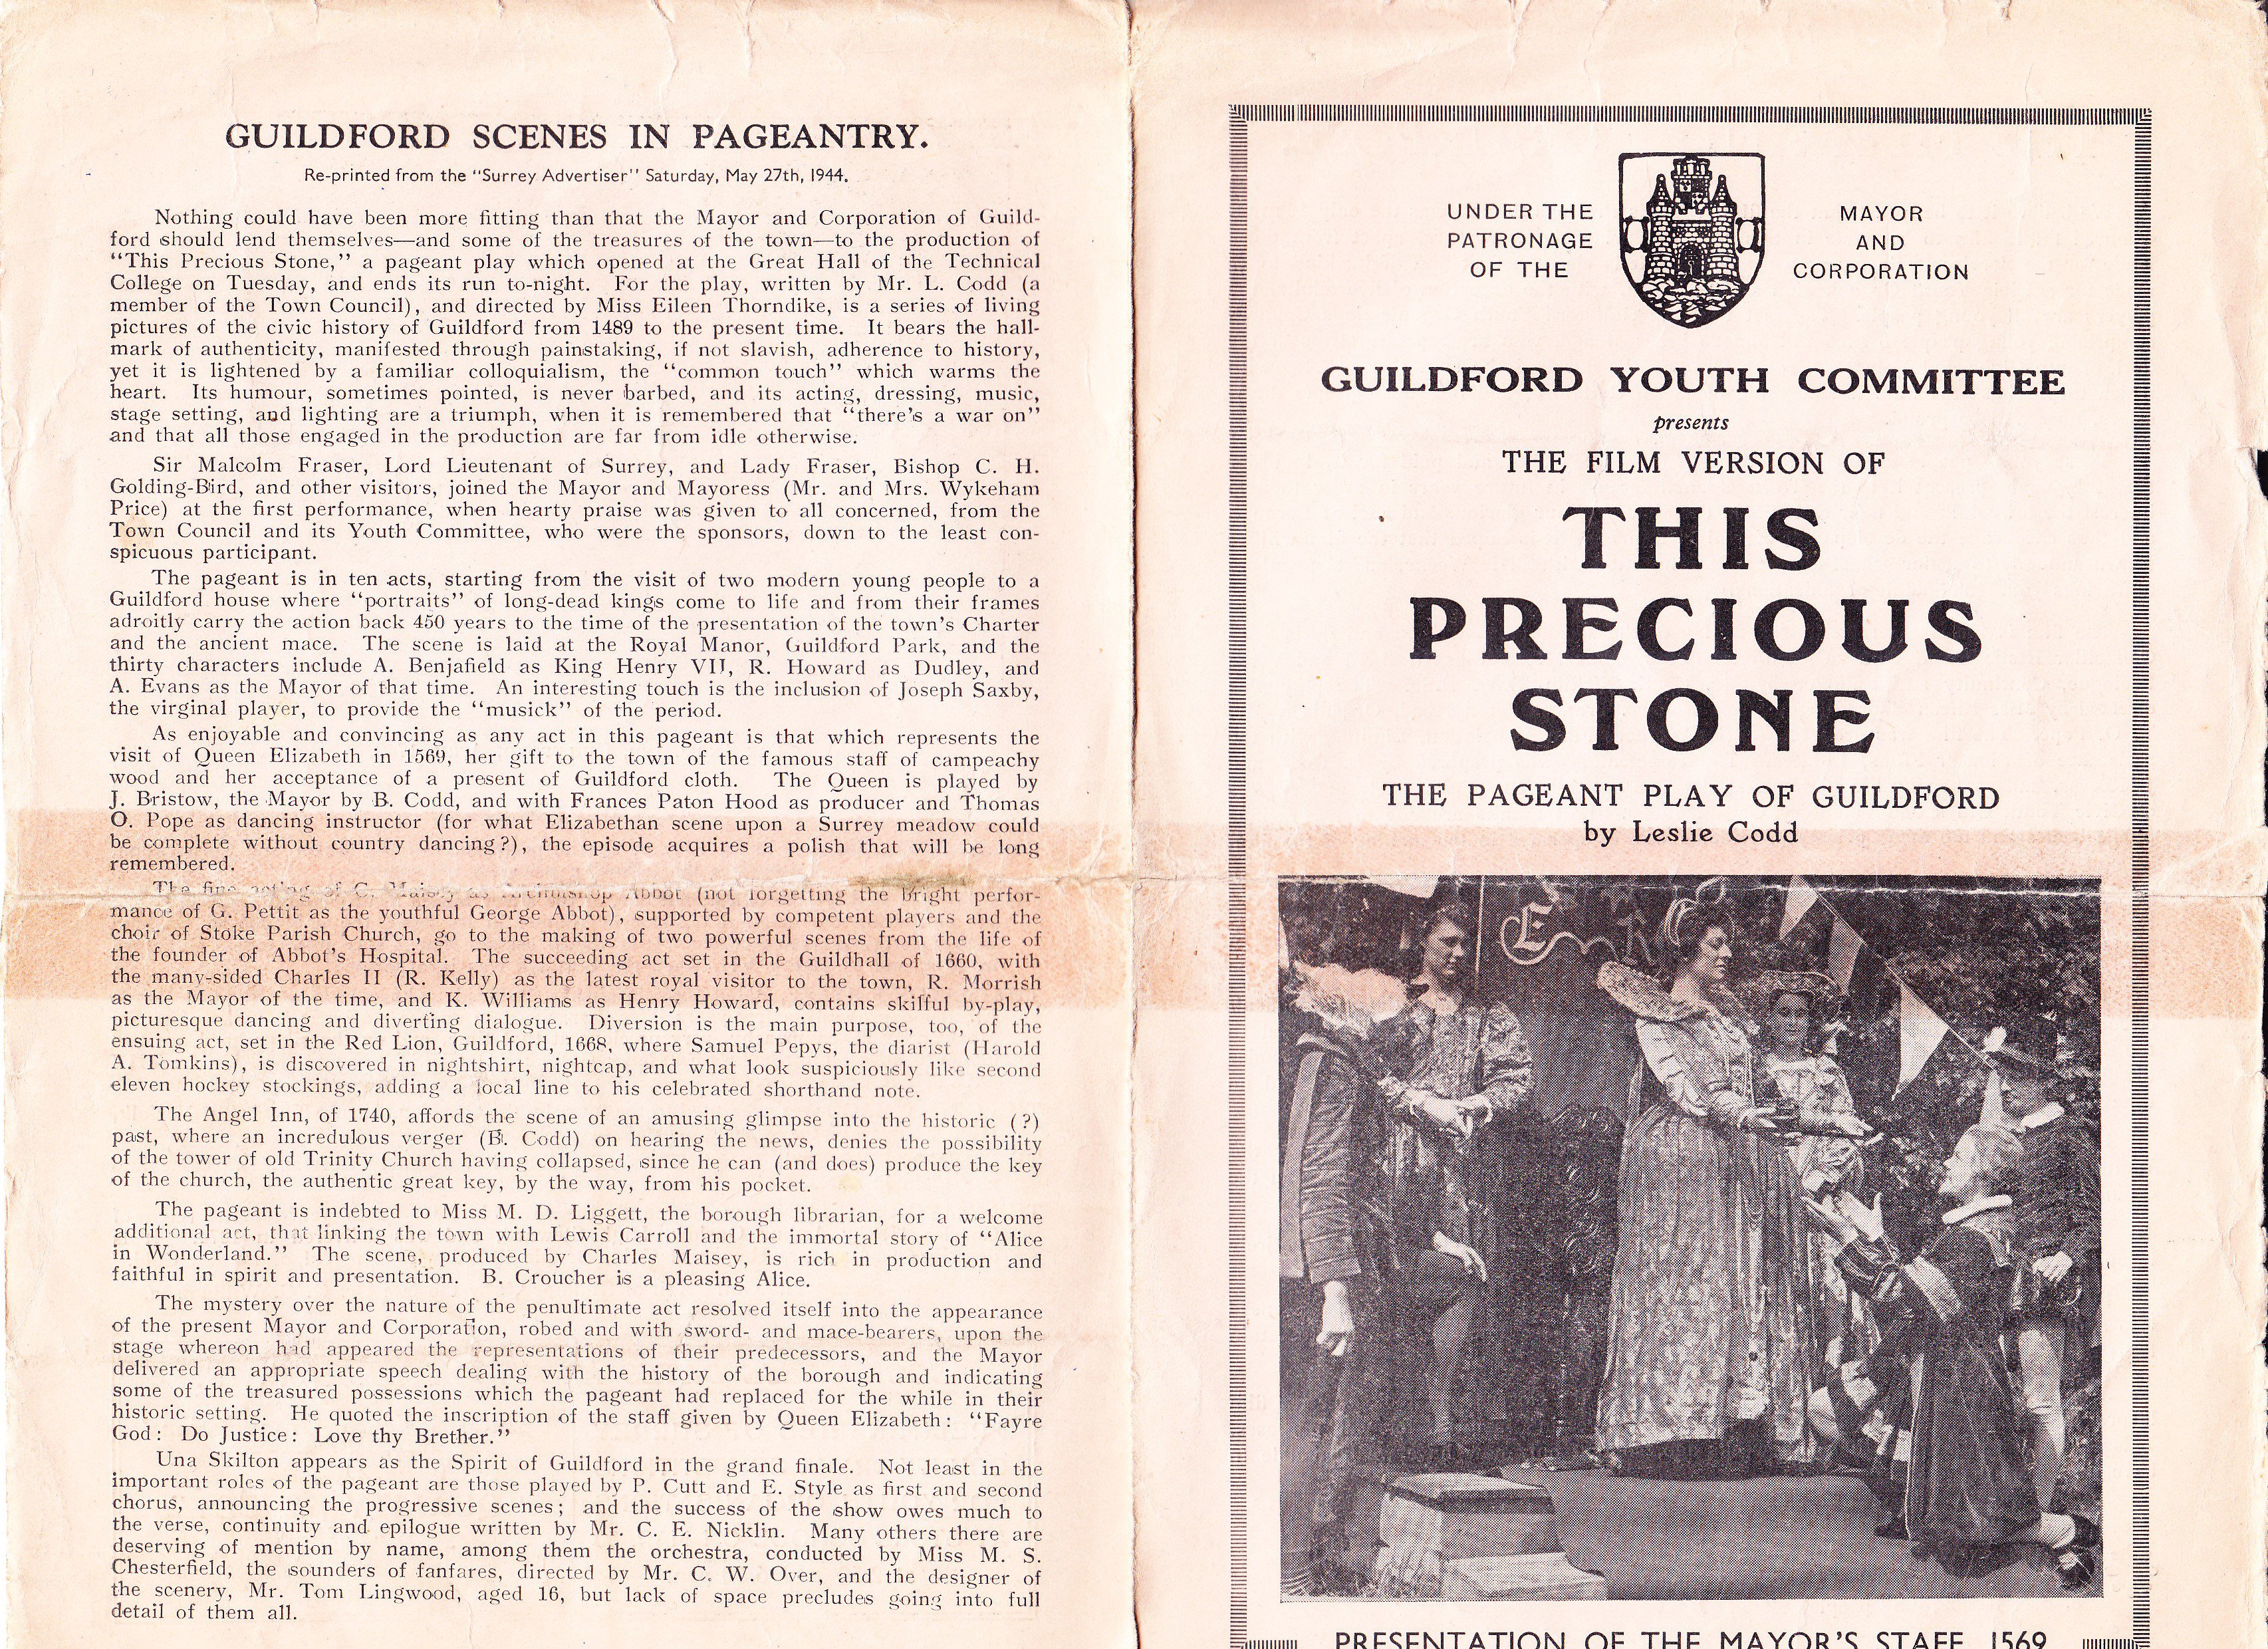 outside cover of booklet of film of Precious Stone pageant 1944